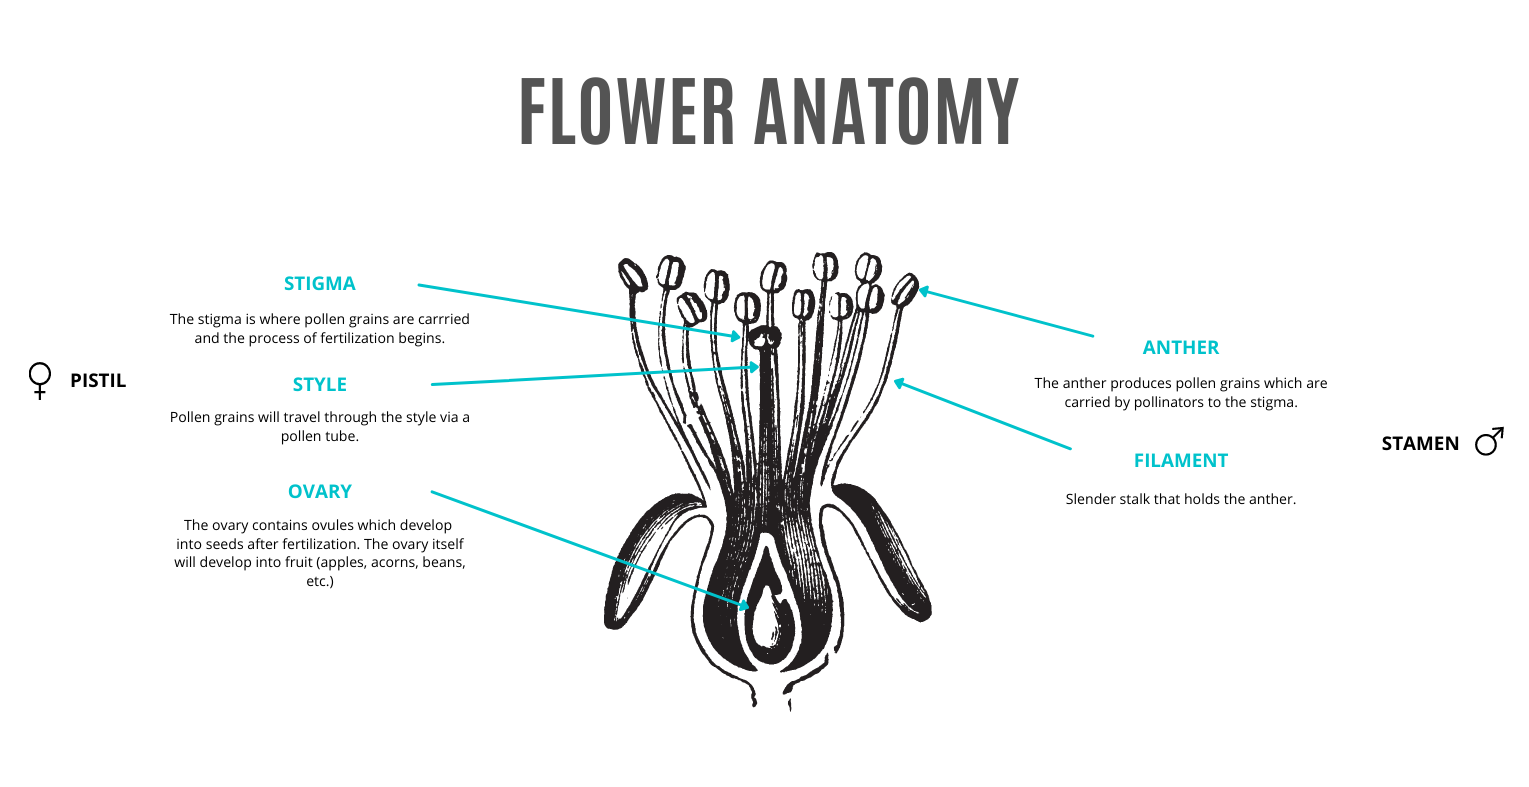 The reproductive anatomy of a flower: stigma, style, ovary, anther, and filament.